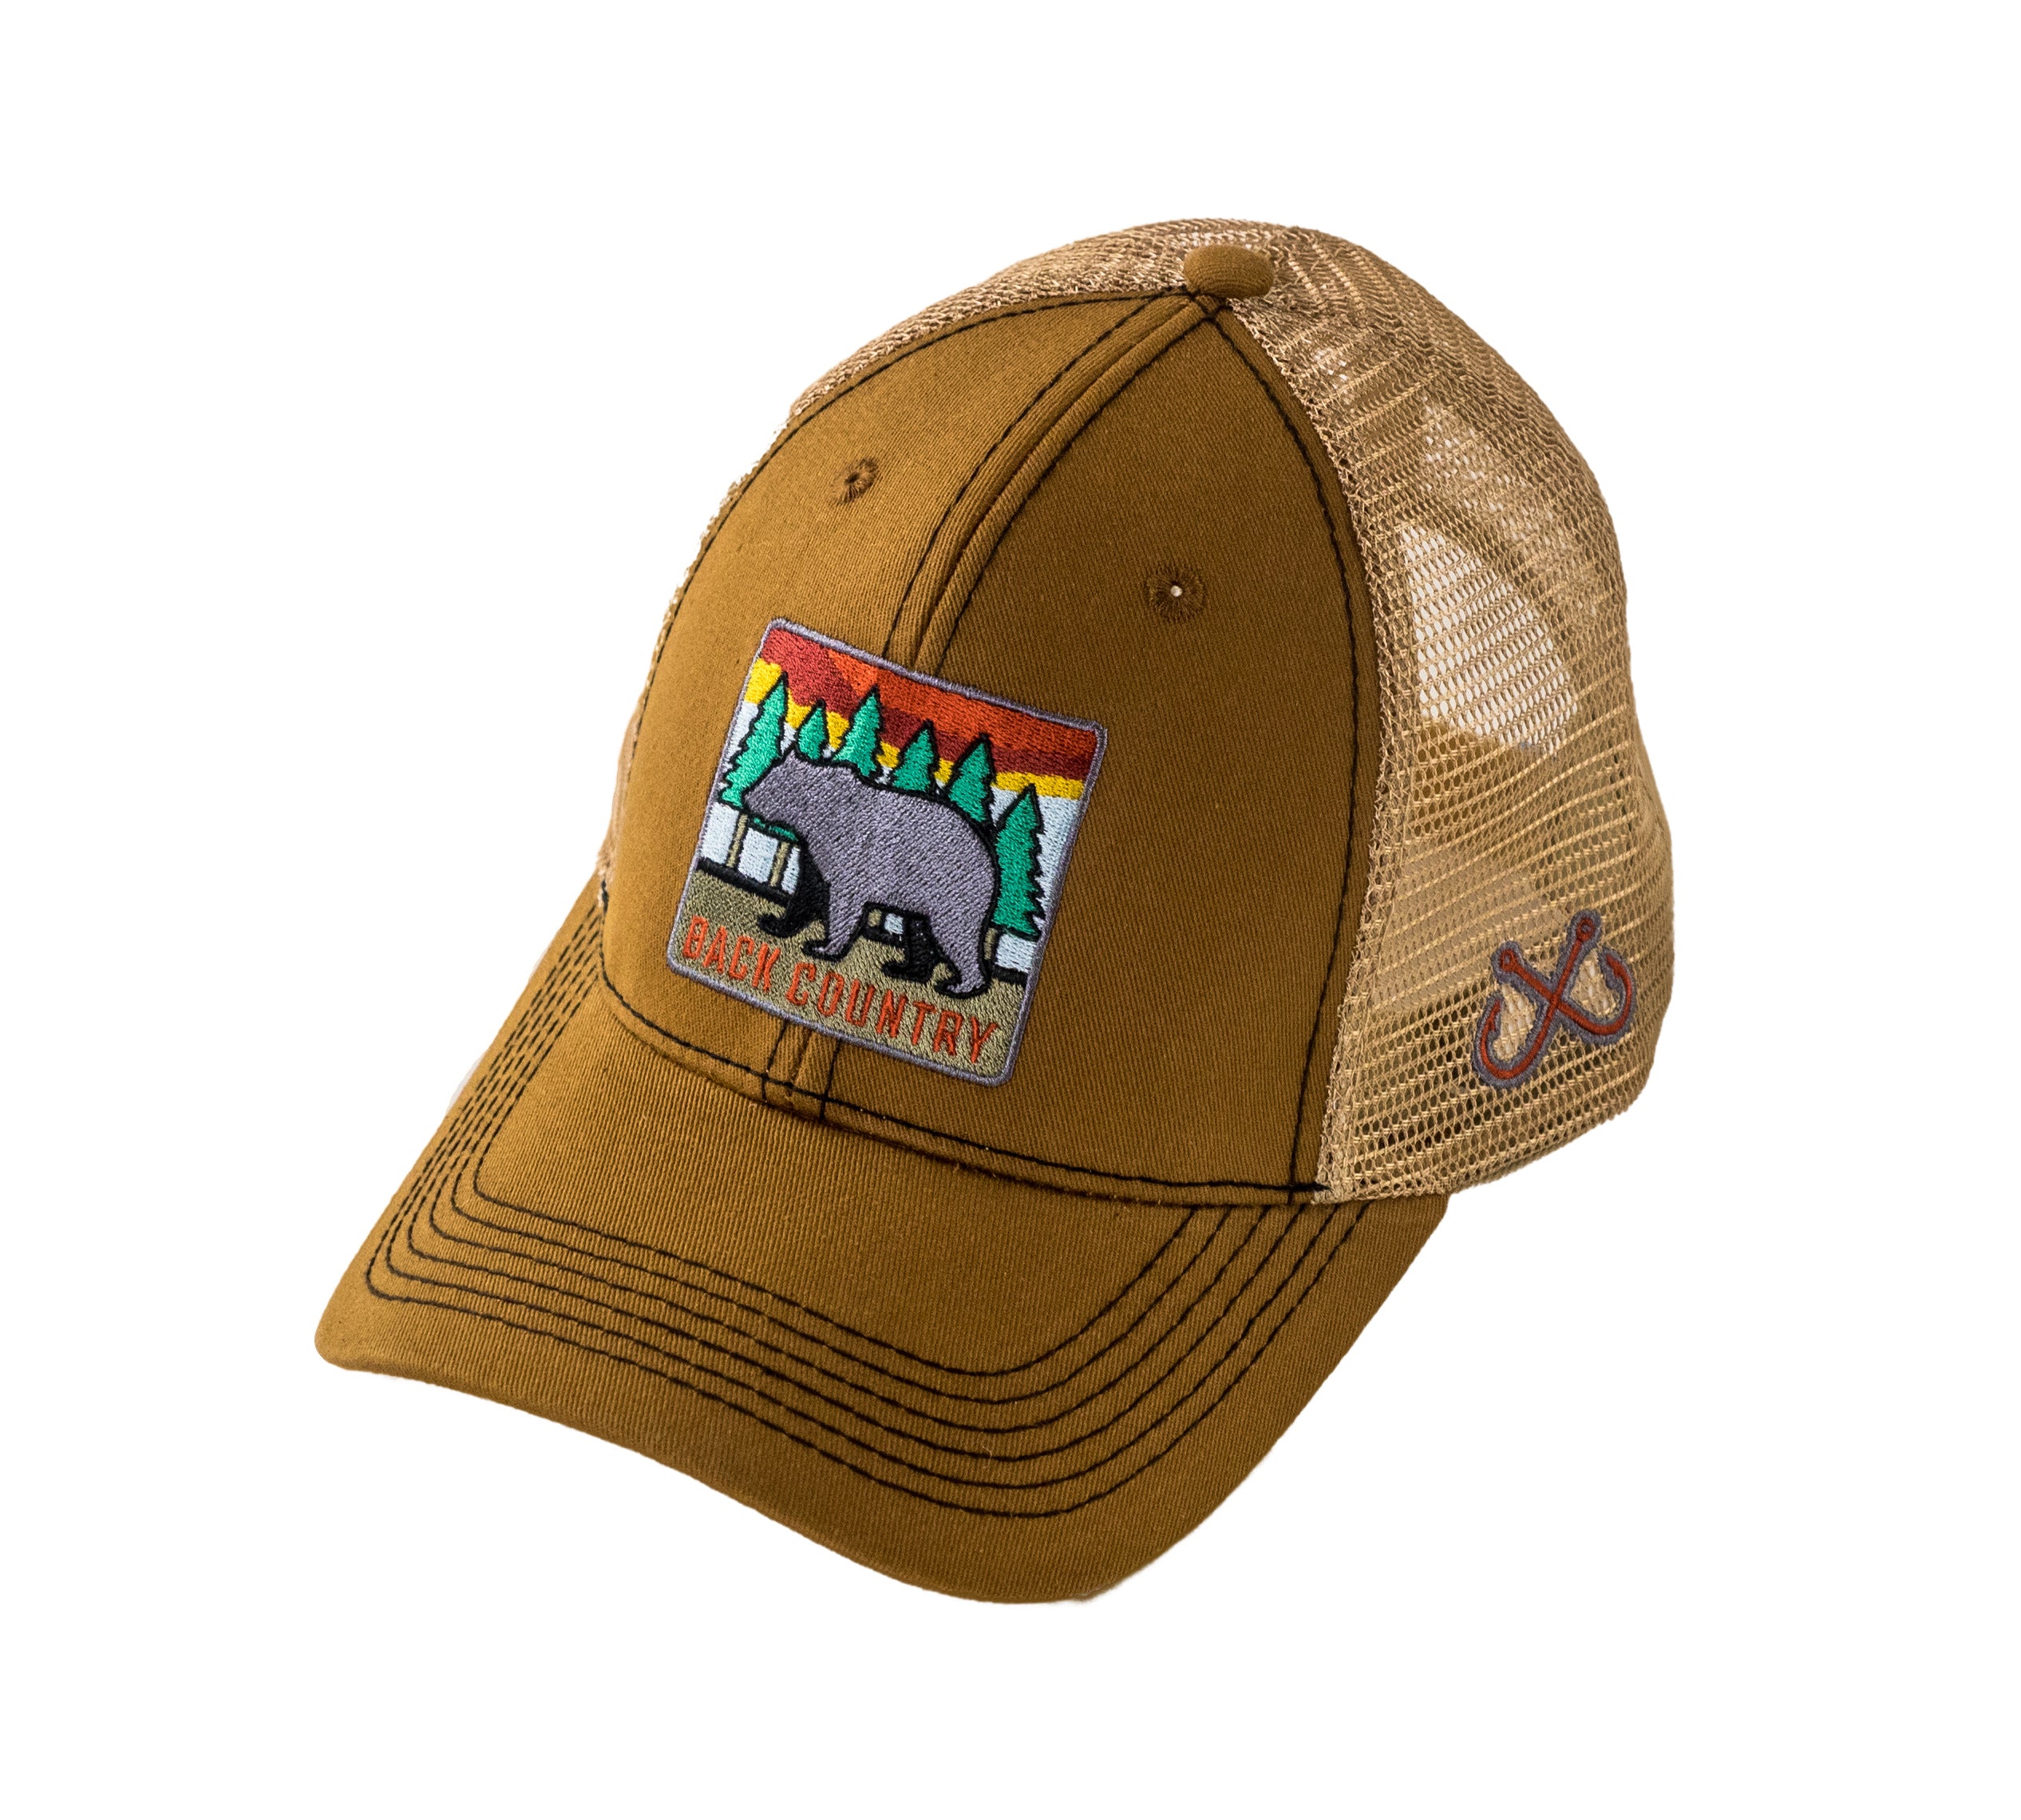 Youth - Trucker Hat - Back Country Bear - Camel/Tan - Southern Lure